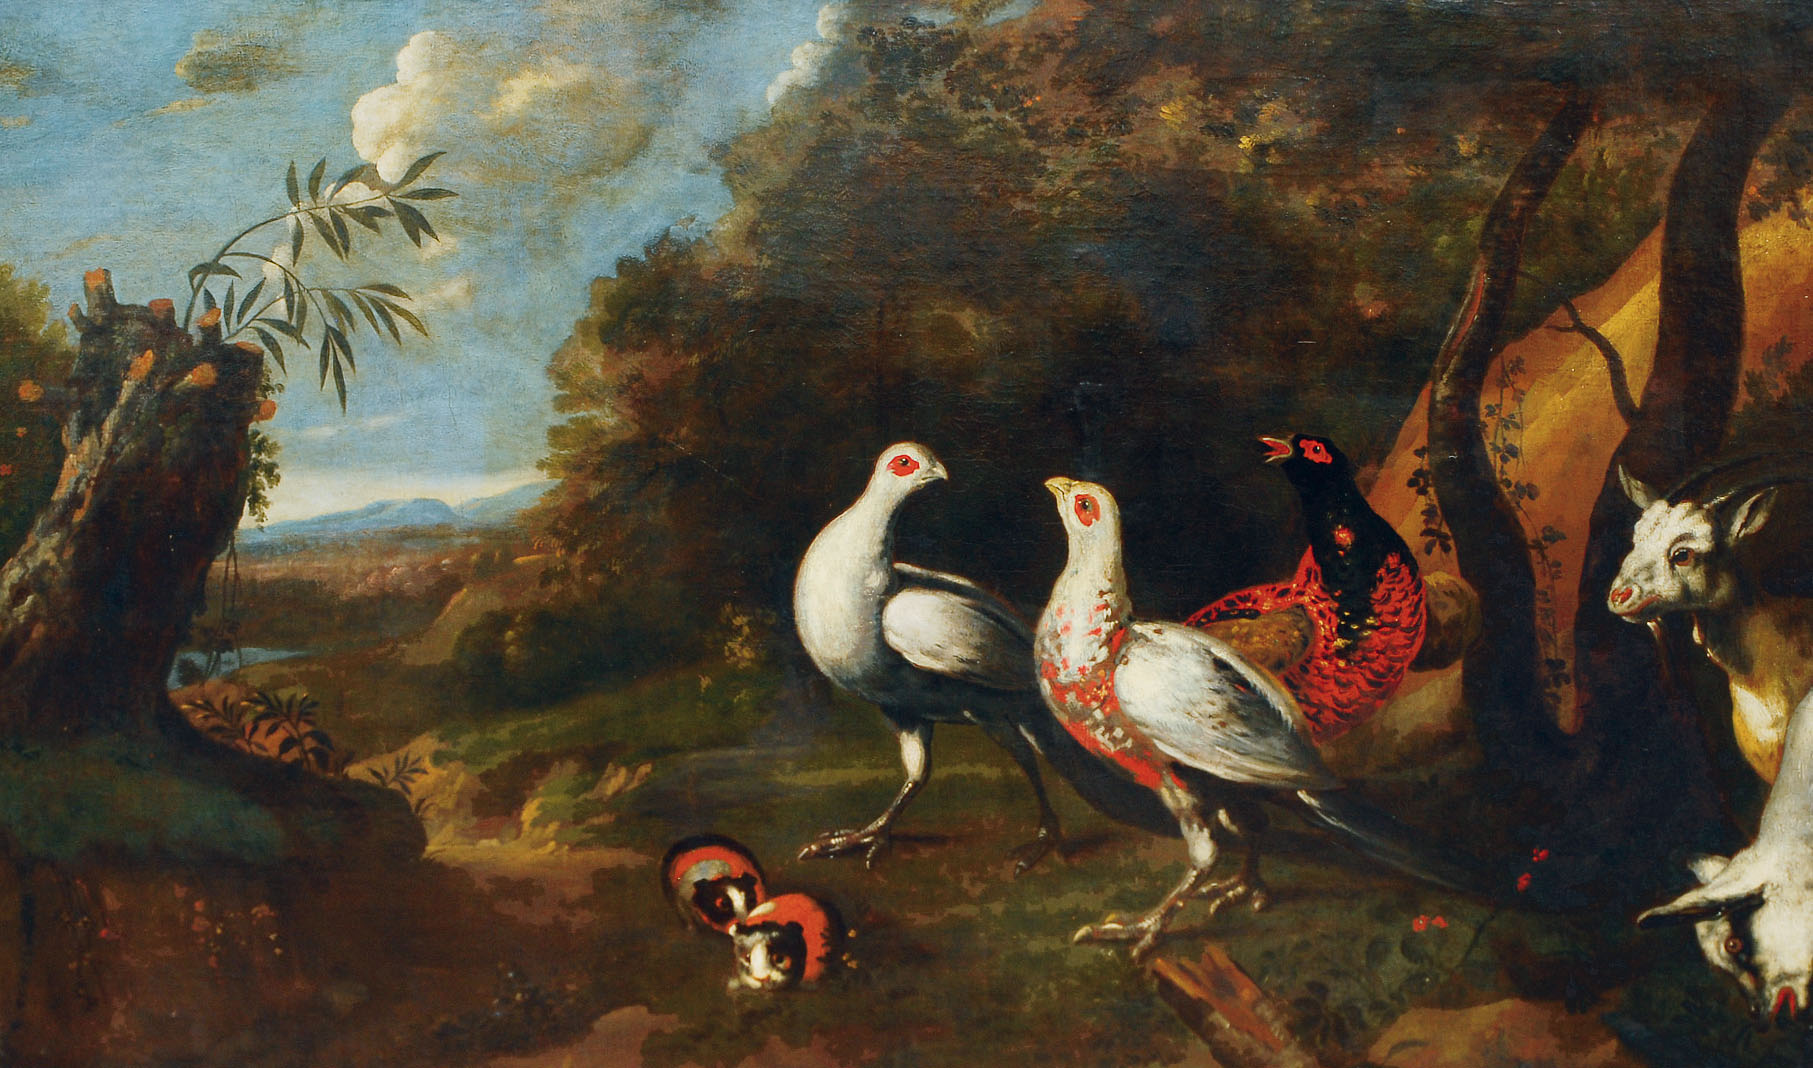 Pheasants and guinea pigs in a landscape